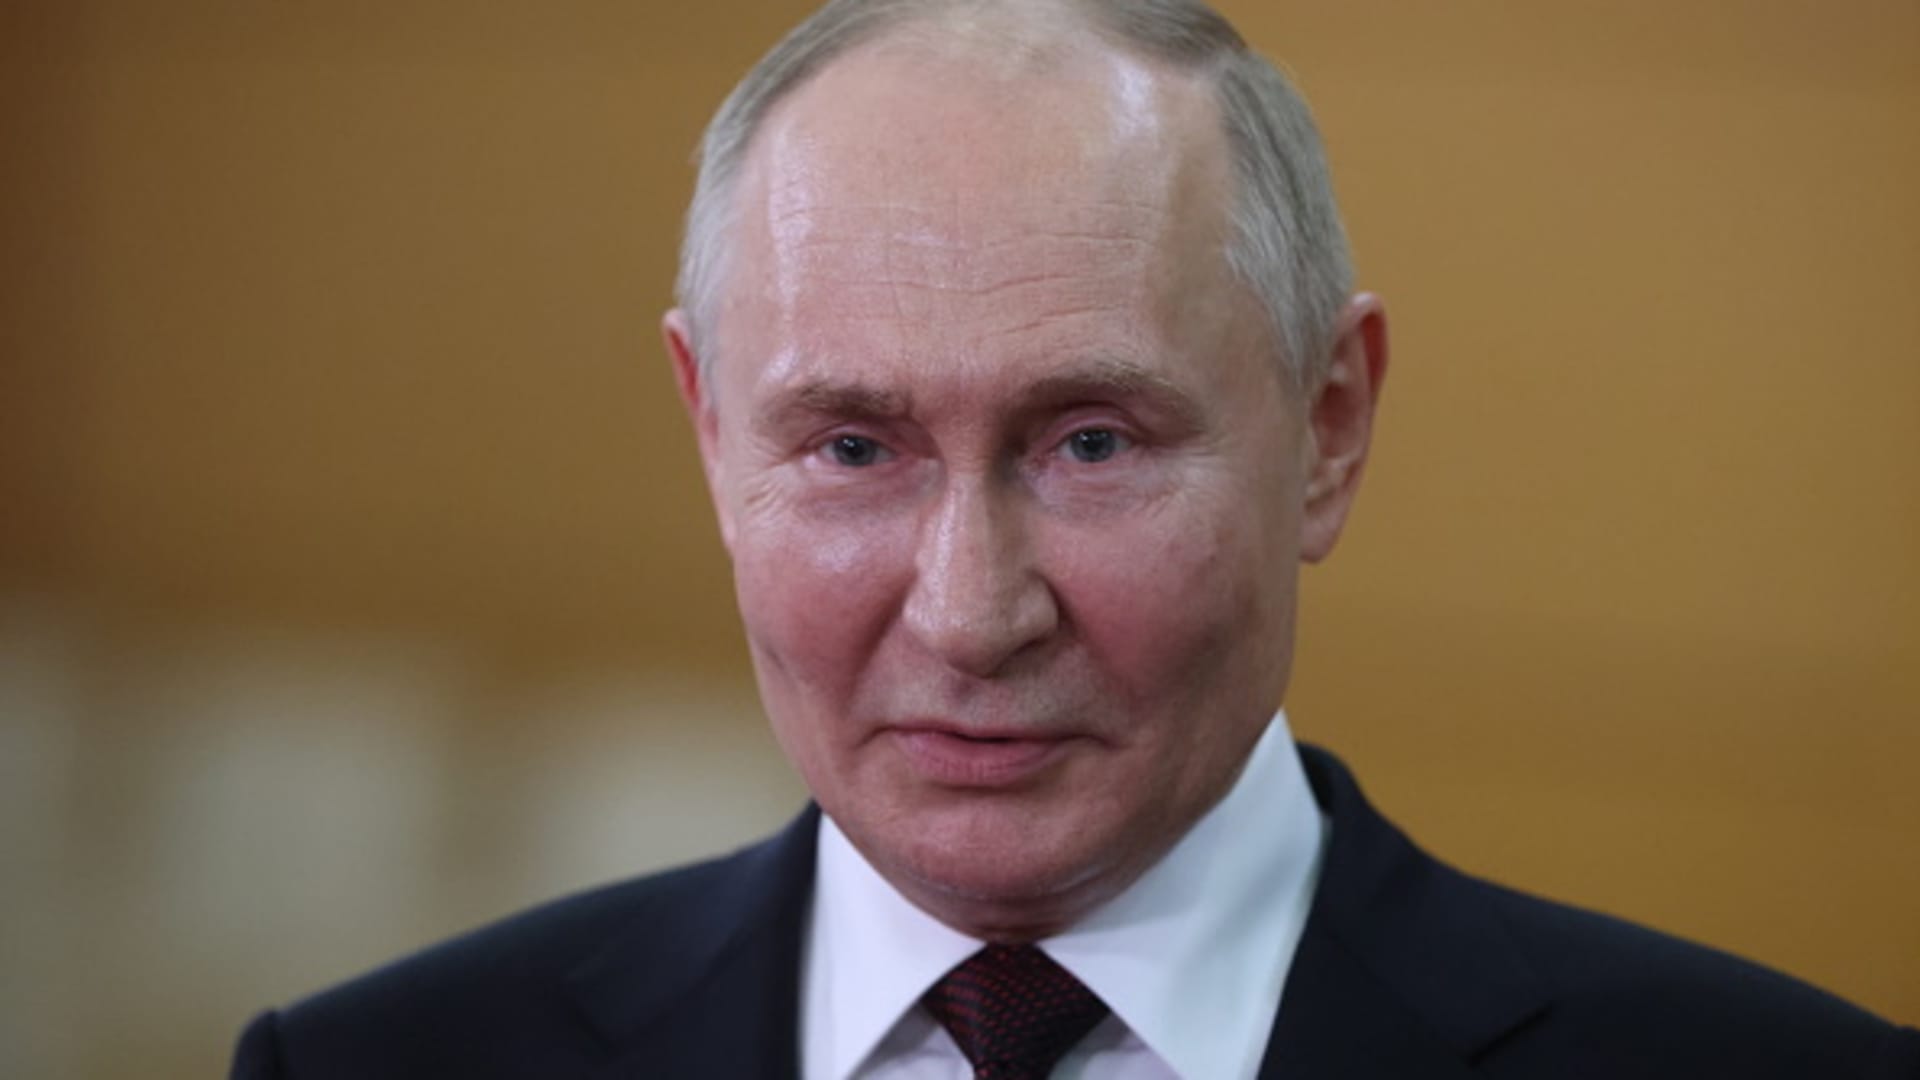 Putin says Russia is expanding its nuclear arsenal